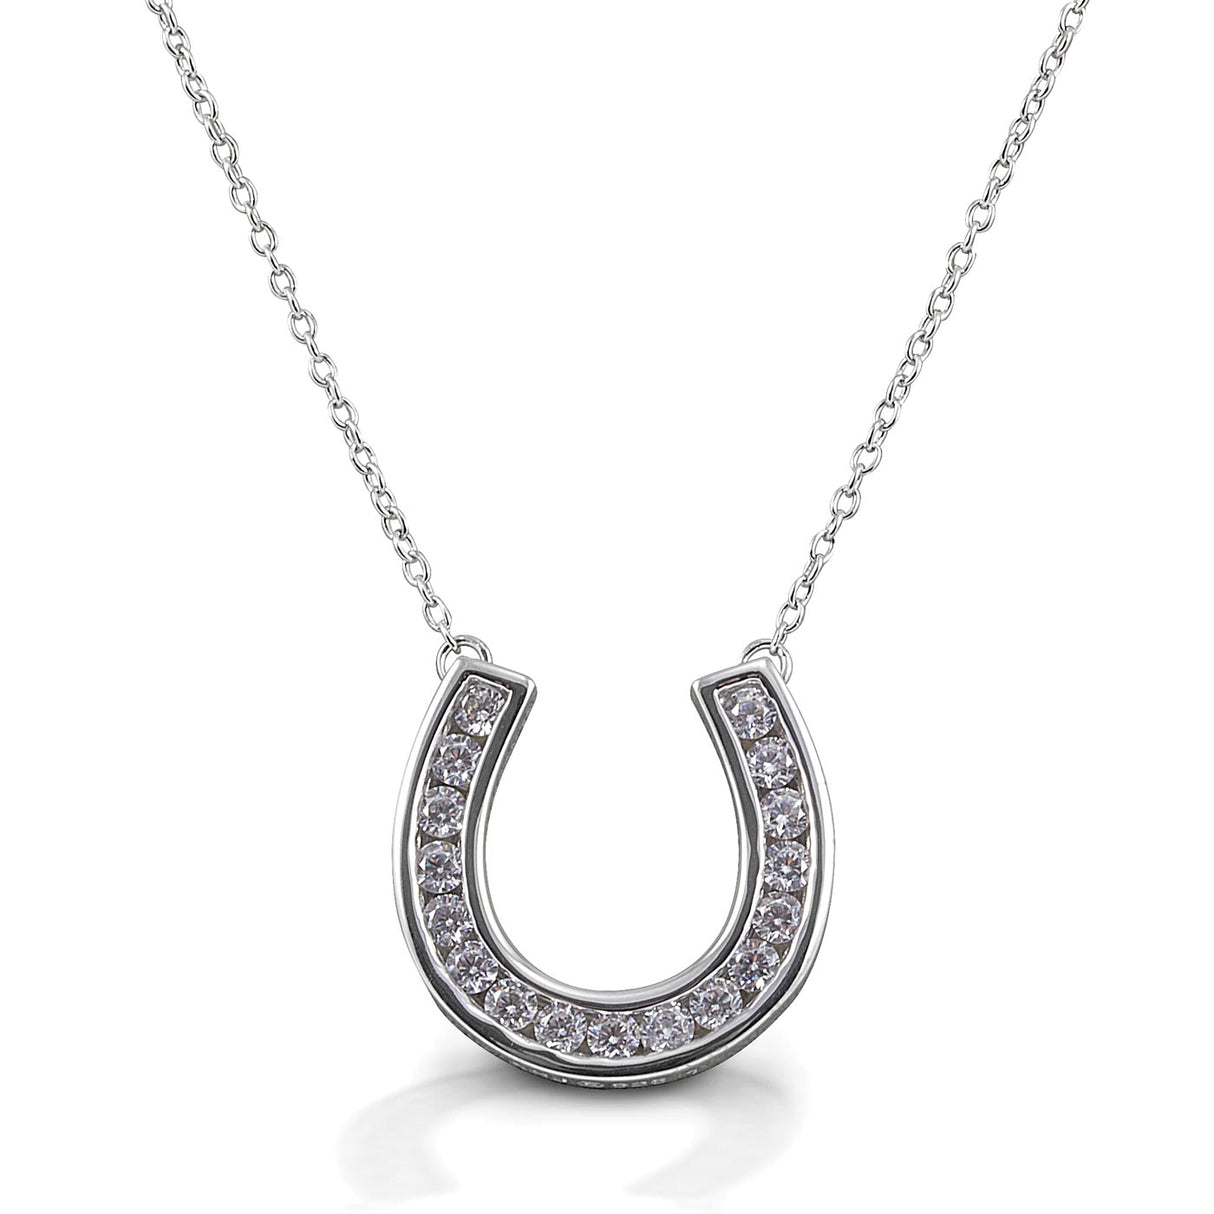 Kelly Herd Contemporary Pave Horseshoe Necklace